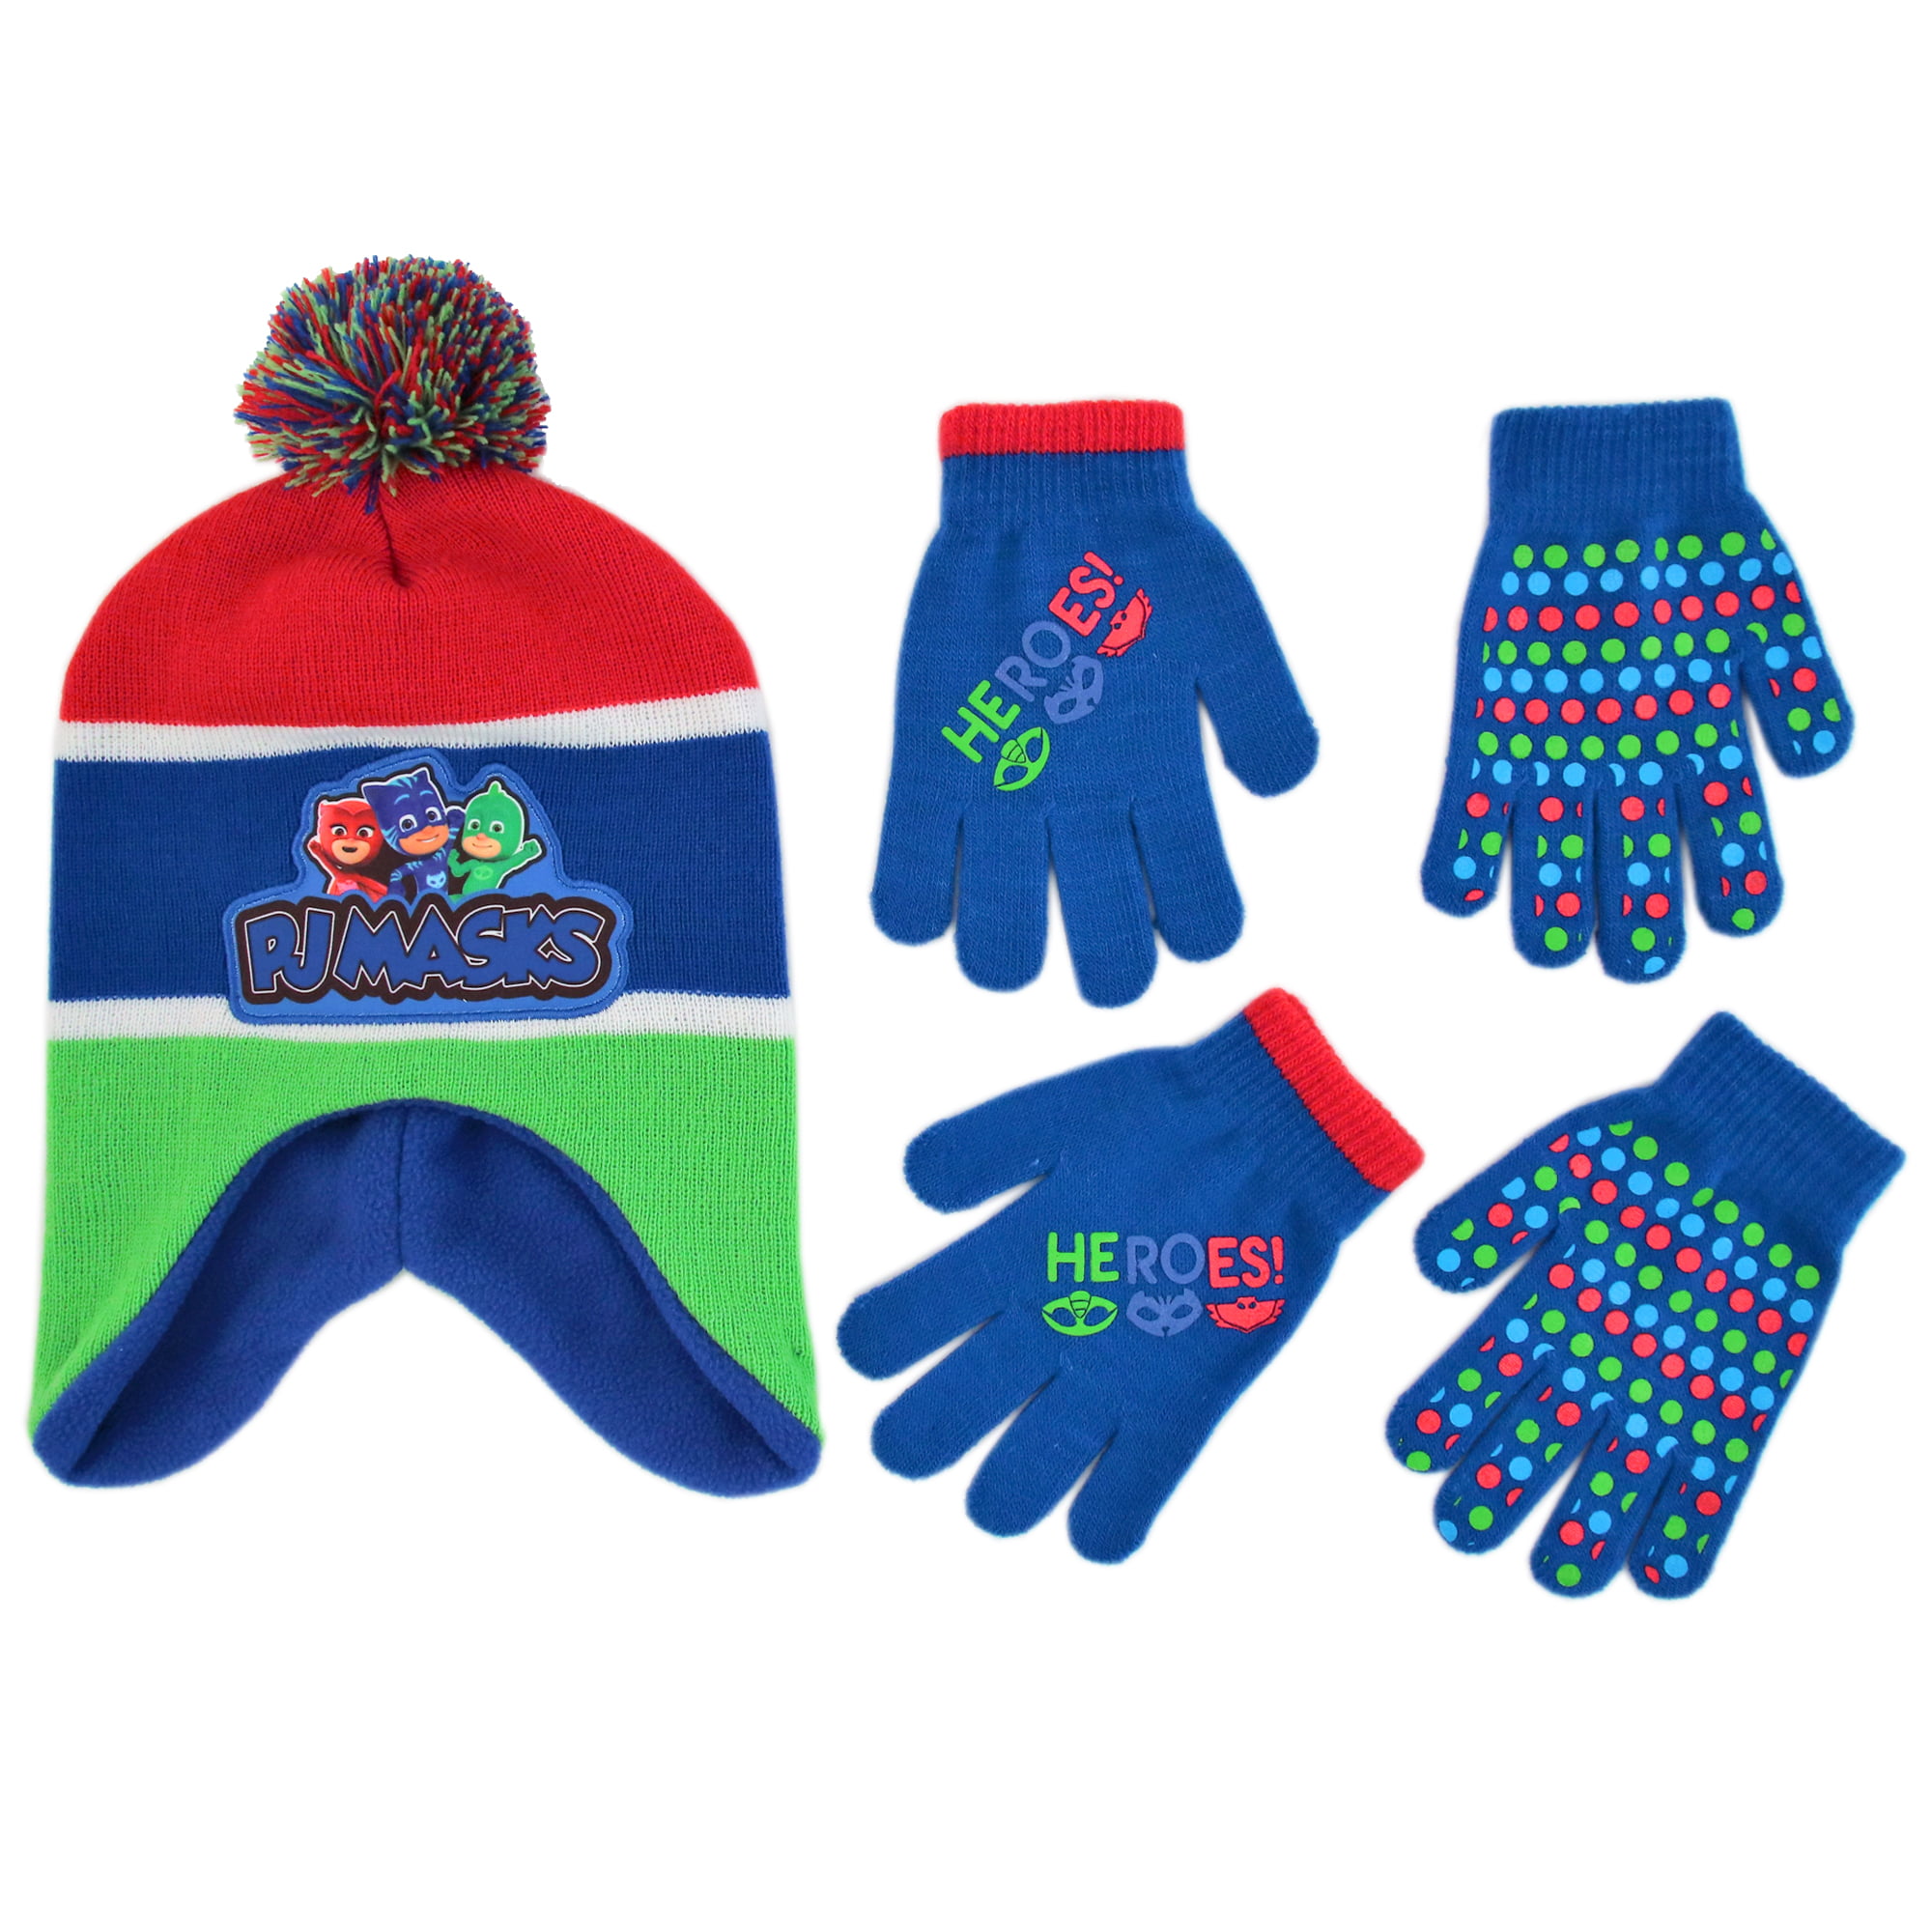 Pj Masks boys Assorted Characters Beanie Hat and Mittens Cold Weather Set 